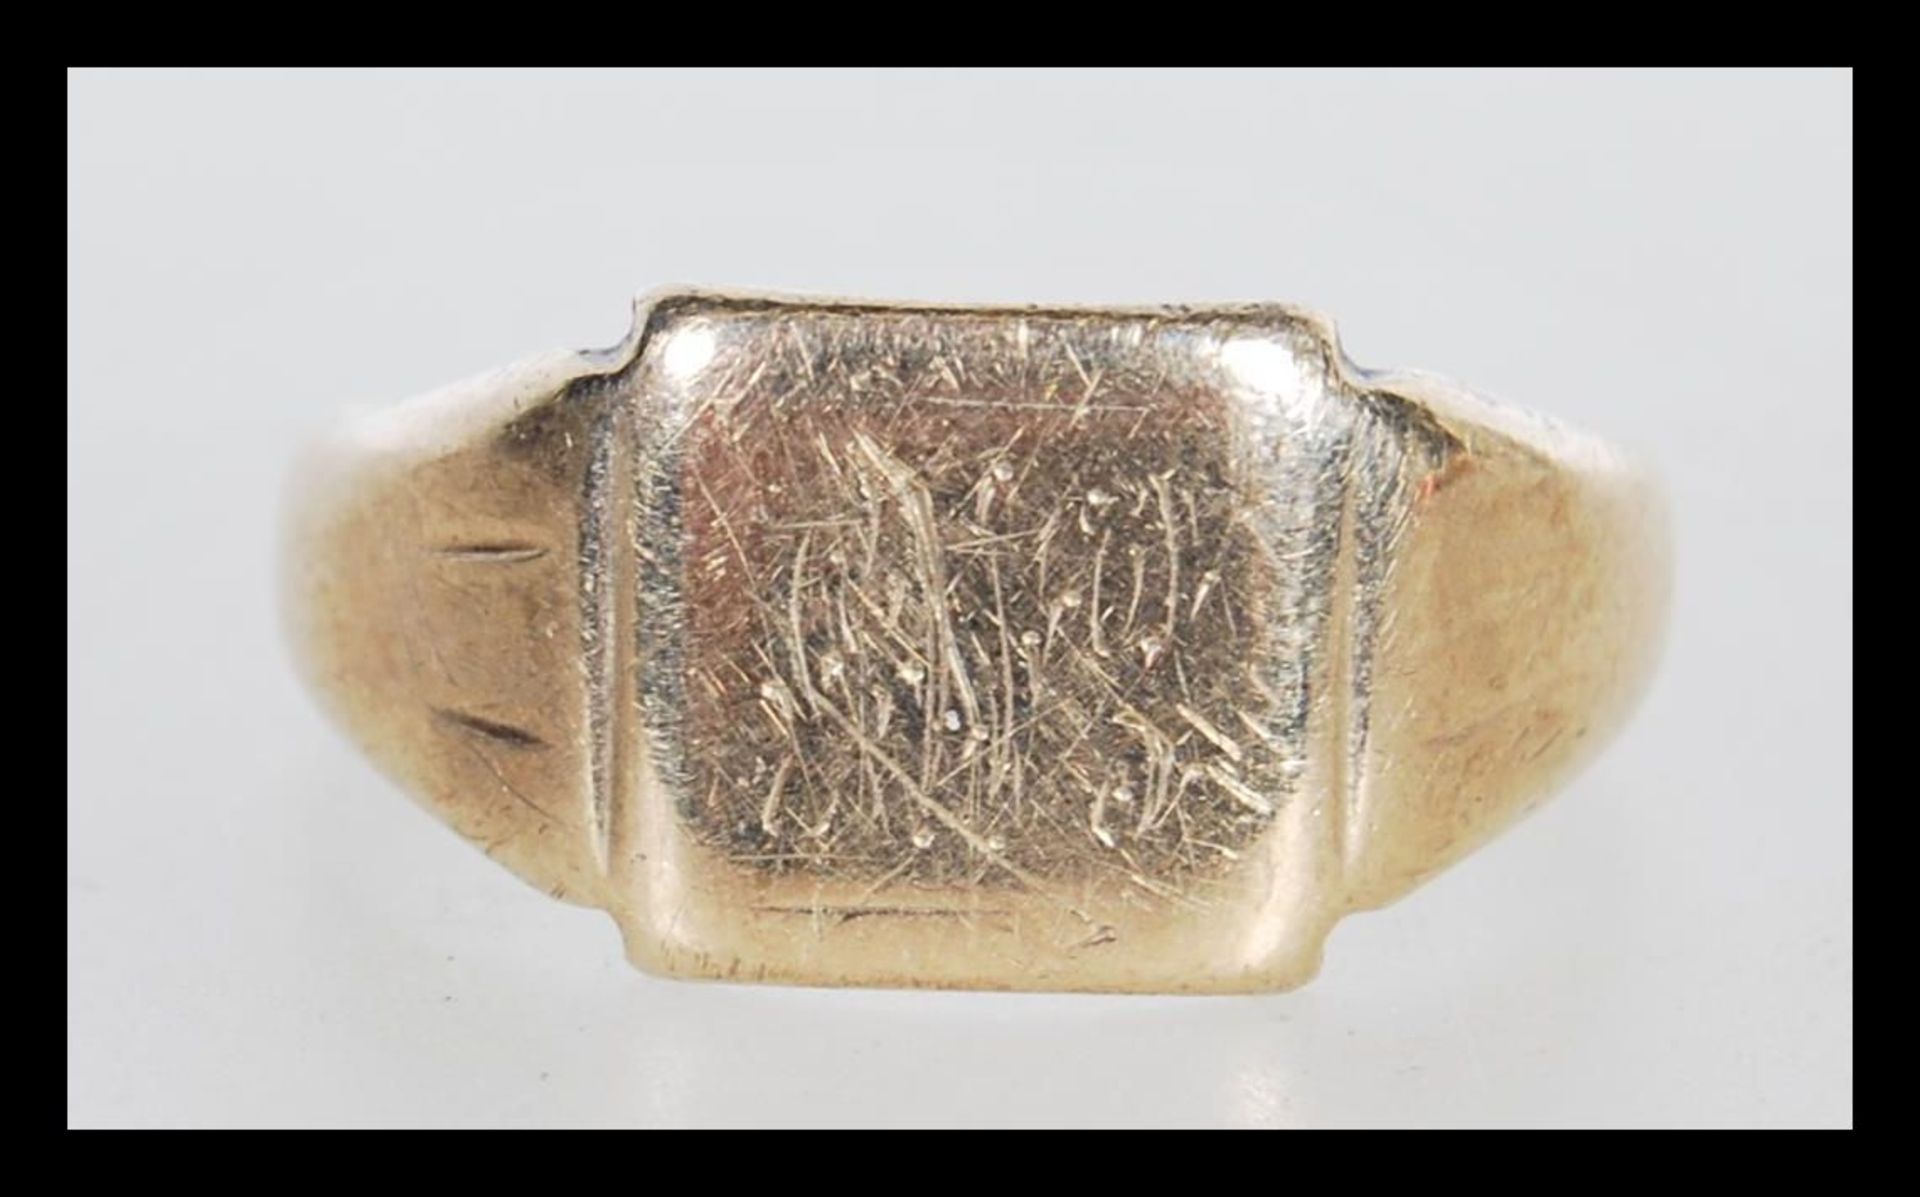 A hallmarked 9ct gold signet ring having a square cartouche panel with engraved initials. Hallmarked